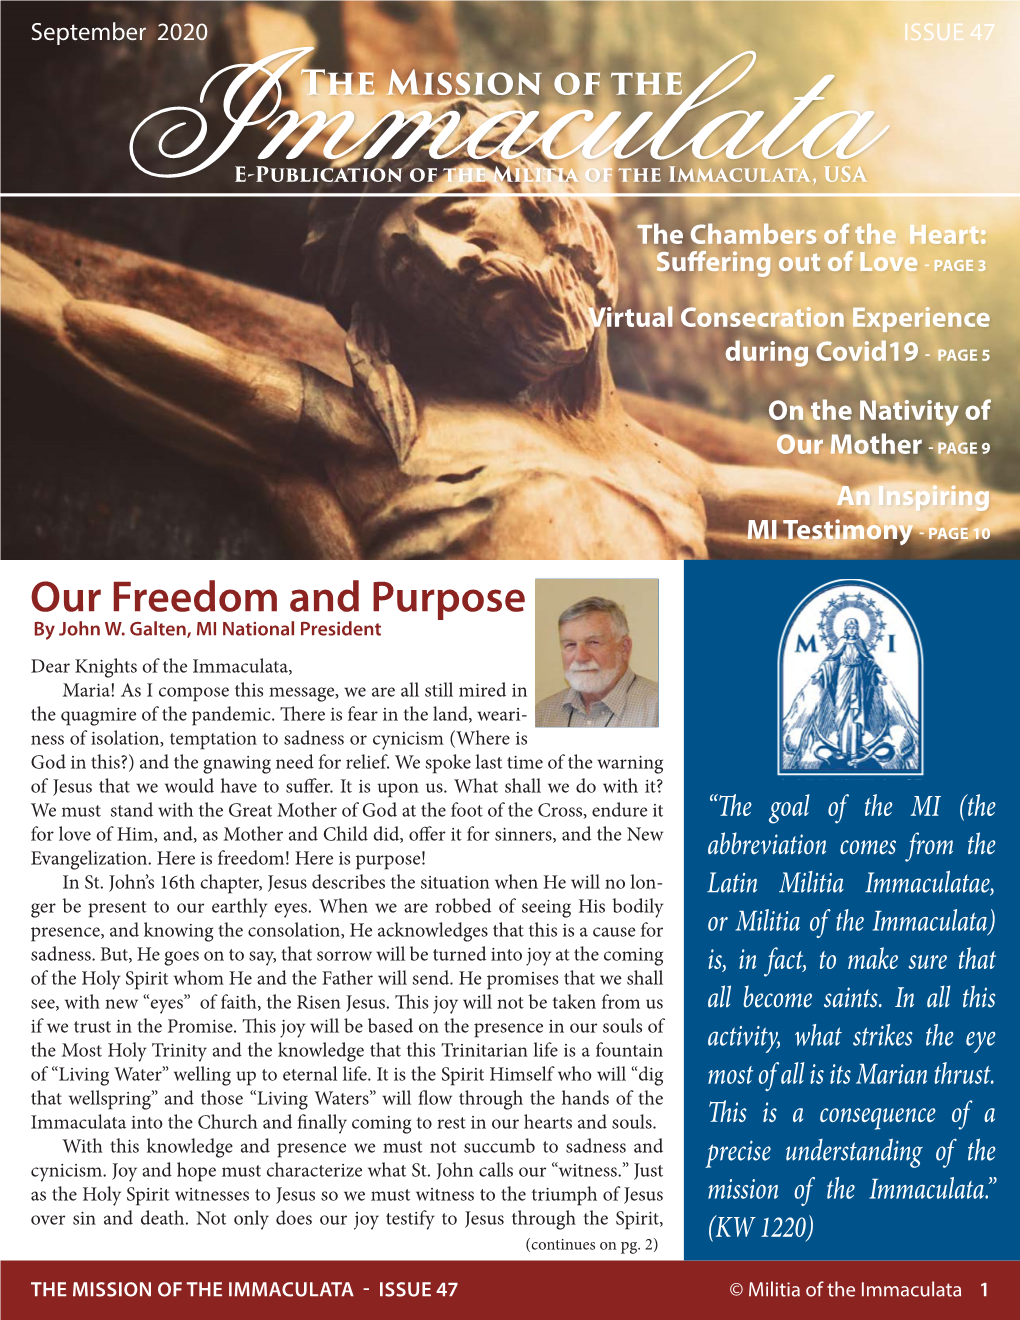 The Mission of the Immaculata Issue 47 September 2020